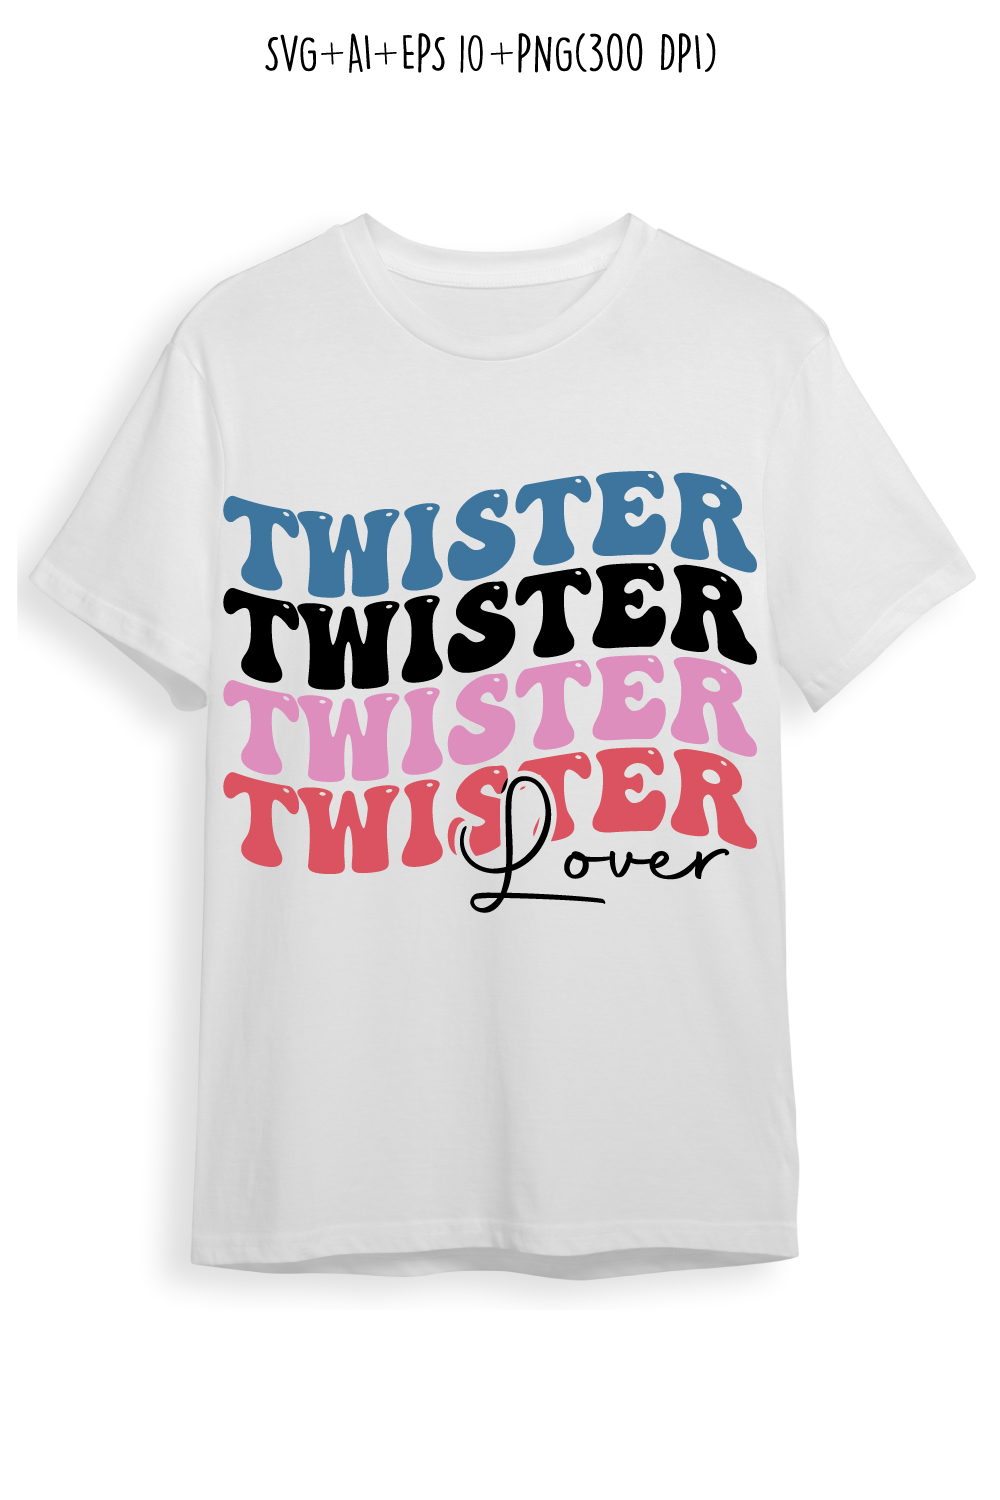 Twister lover indoor game retro typography design for t-shirts, cards, frame artwork, phone cases, bags, mugs, stickers, tumblers, print, etc pinterest preview image.